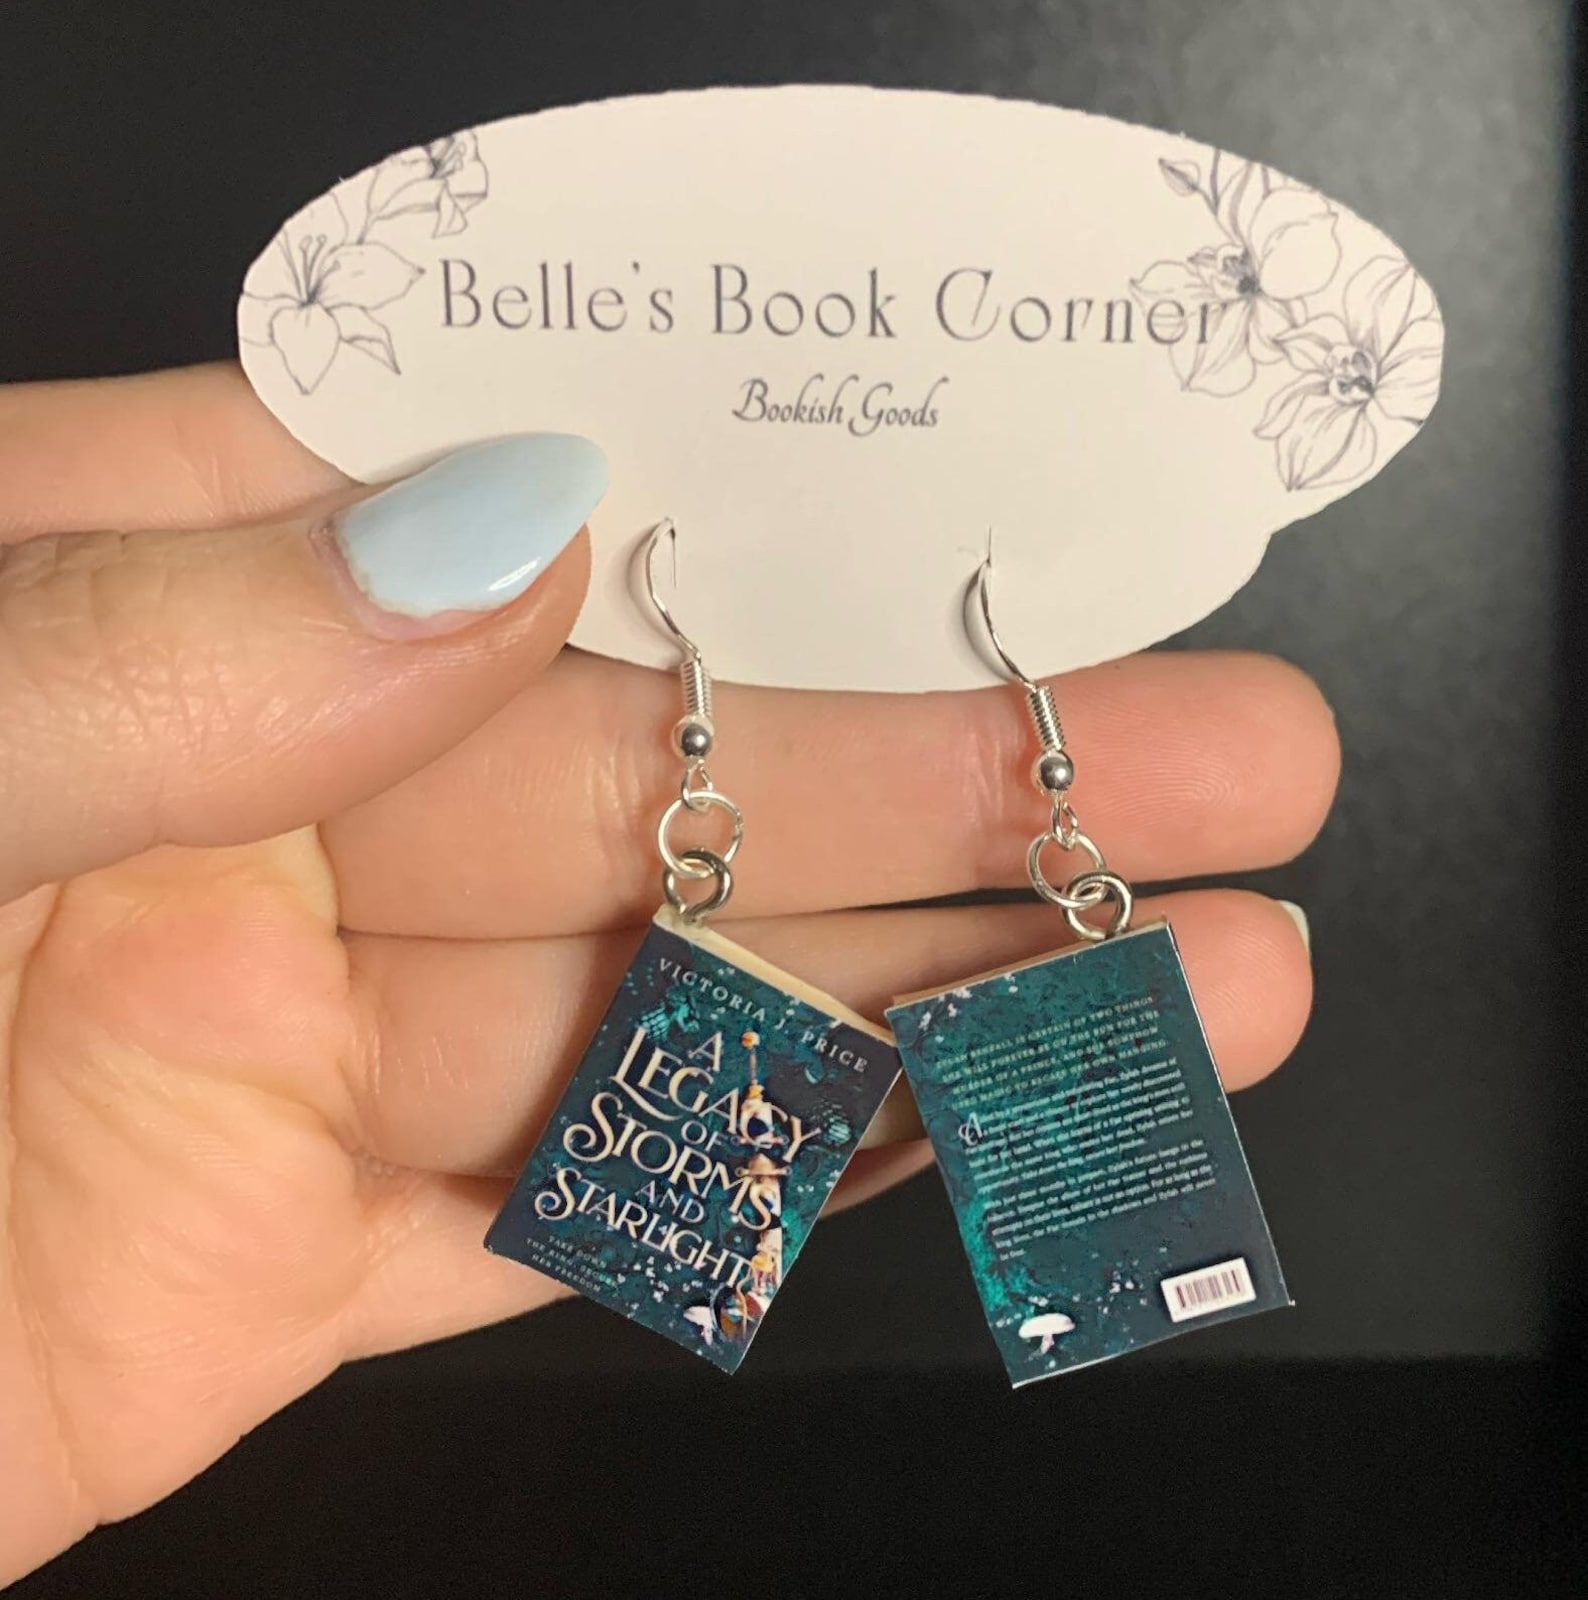 A set of earrings in the shape of books